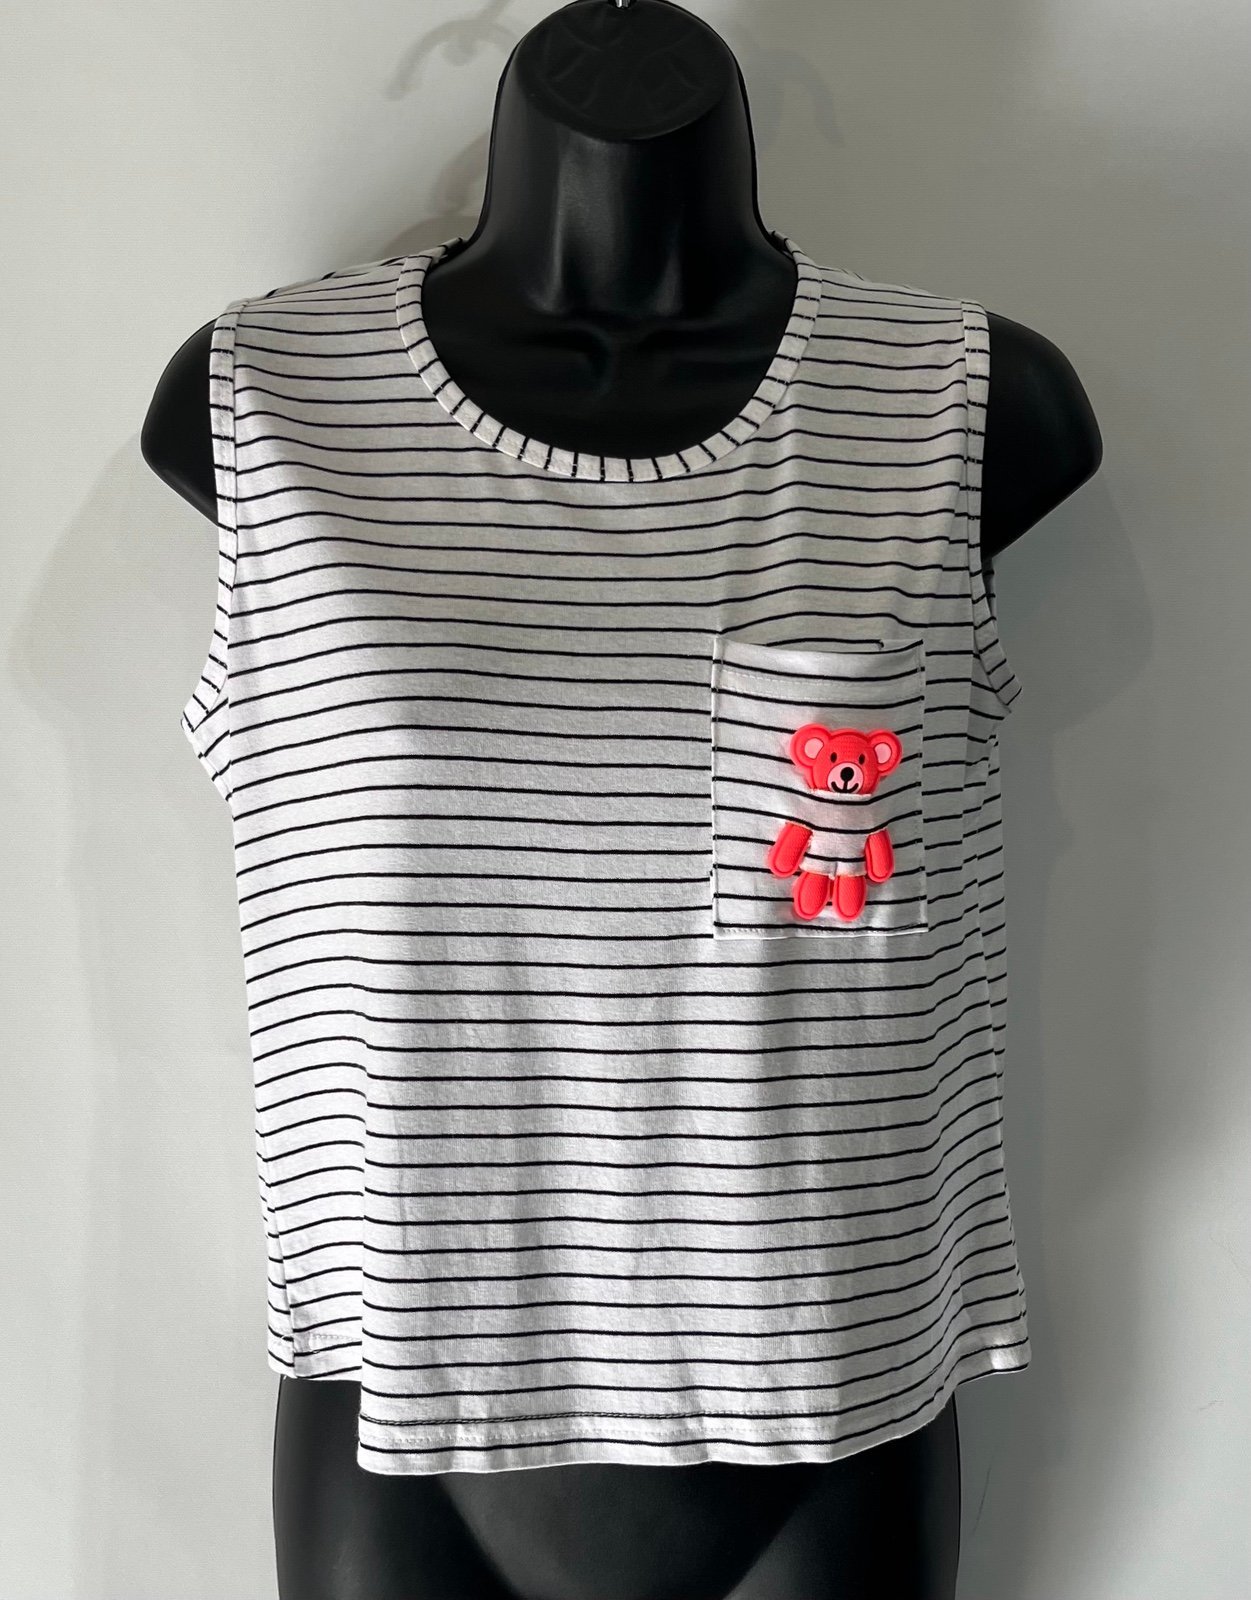 The Best Seller Arcan Womens Black & White Stripped Top